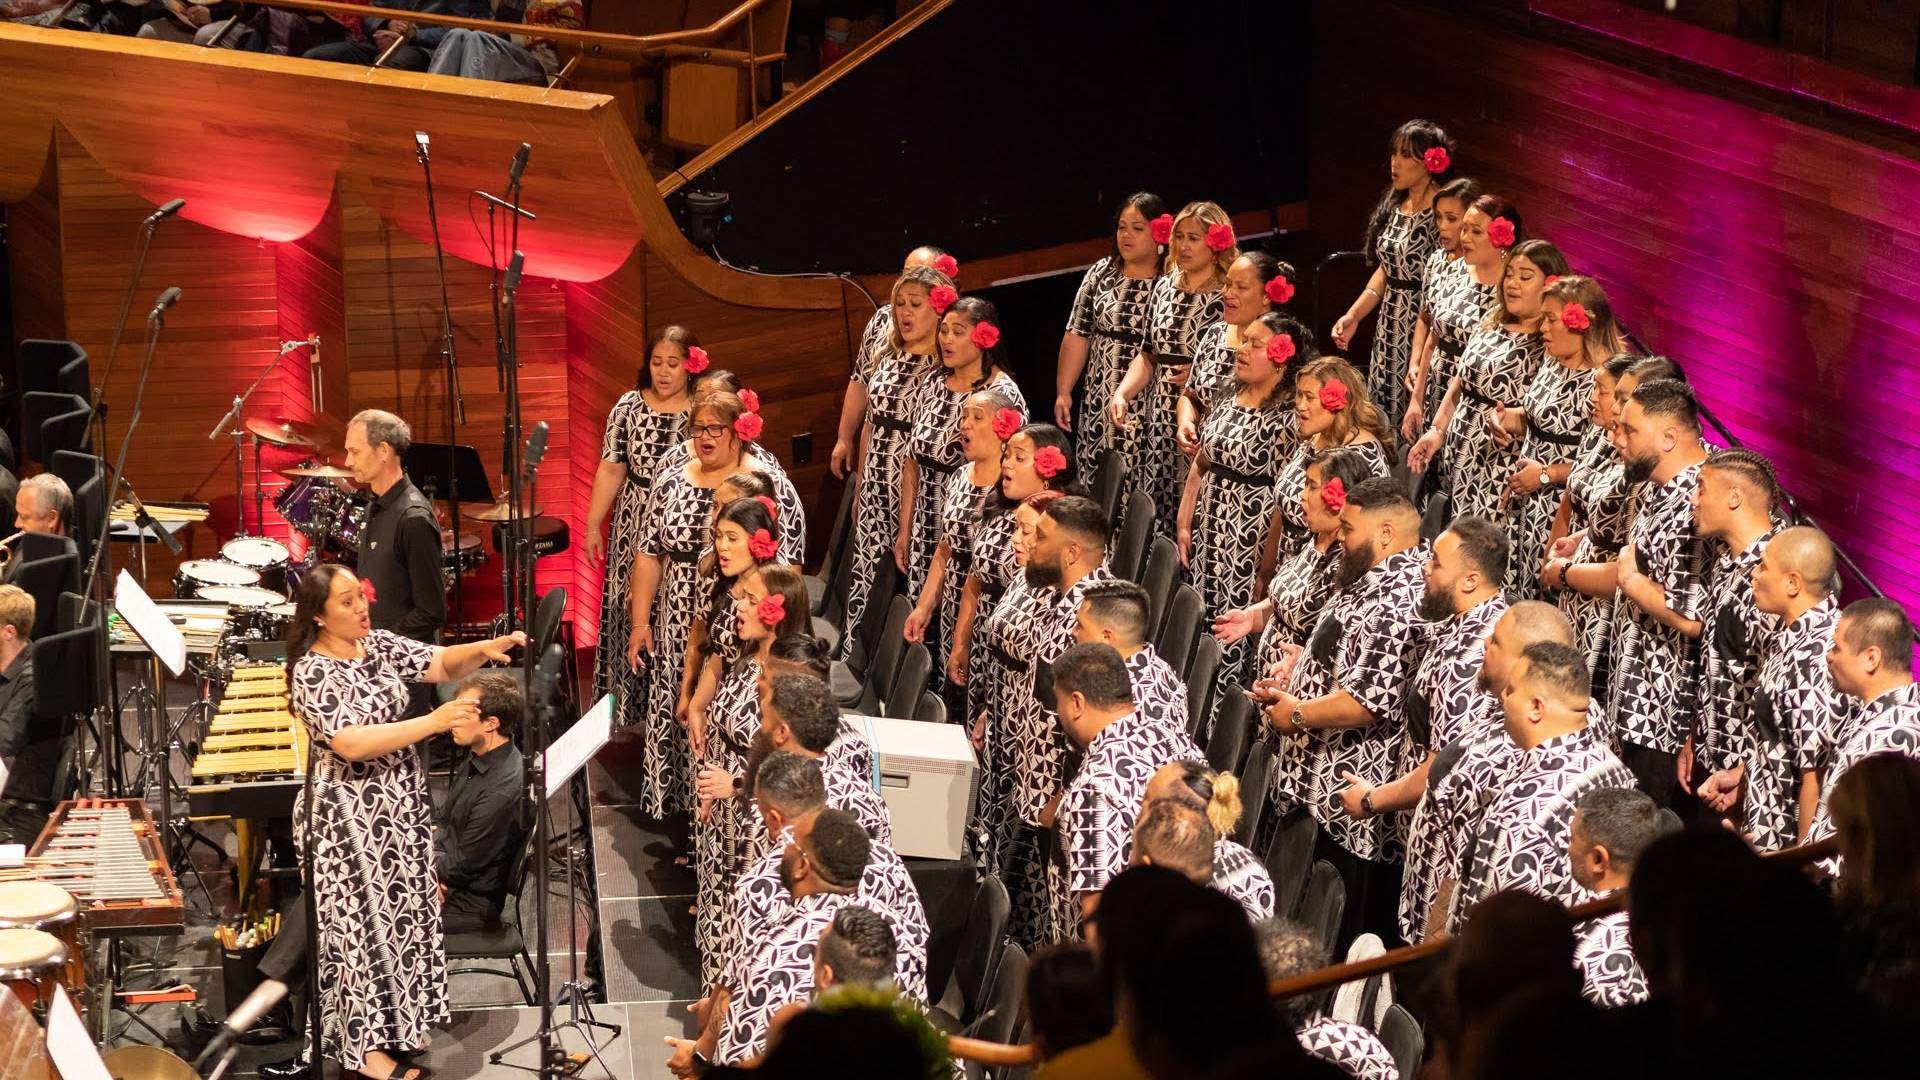 Pasifika Music Celebration 'Mana Moana' Is Coming to Auckland for One Night Only